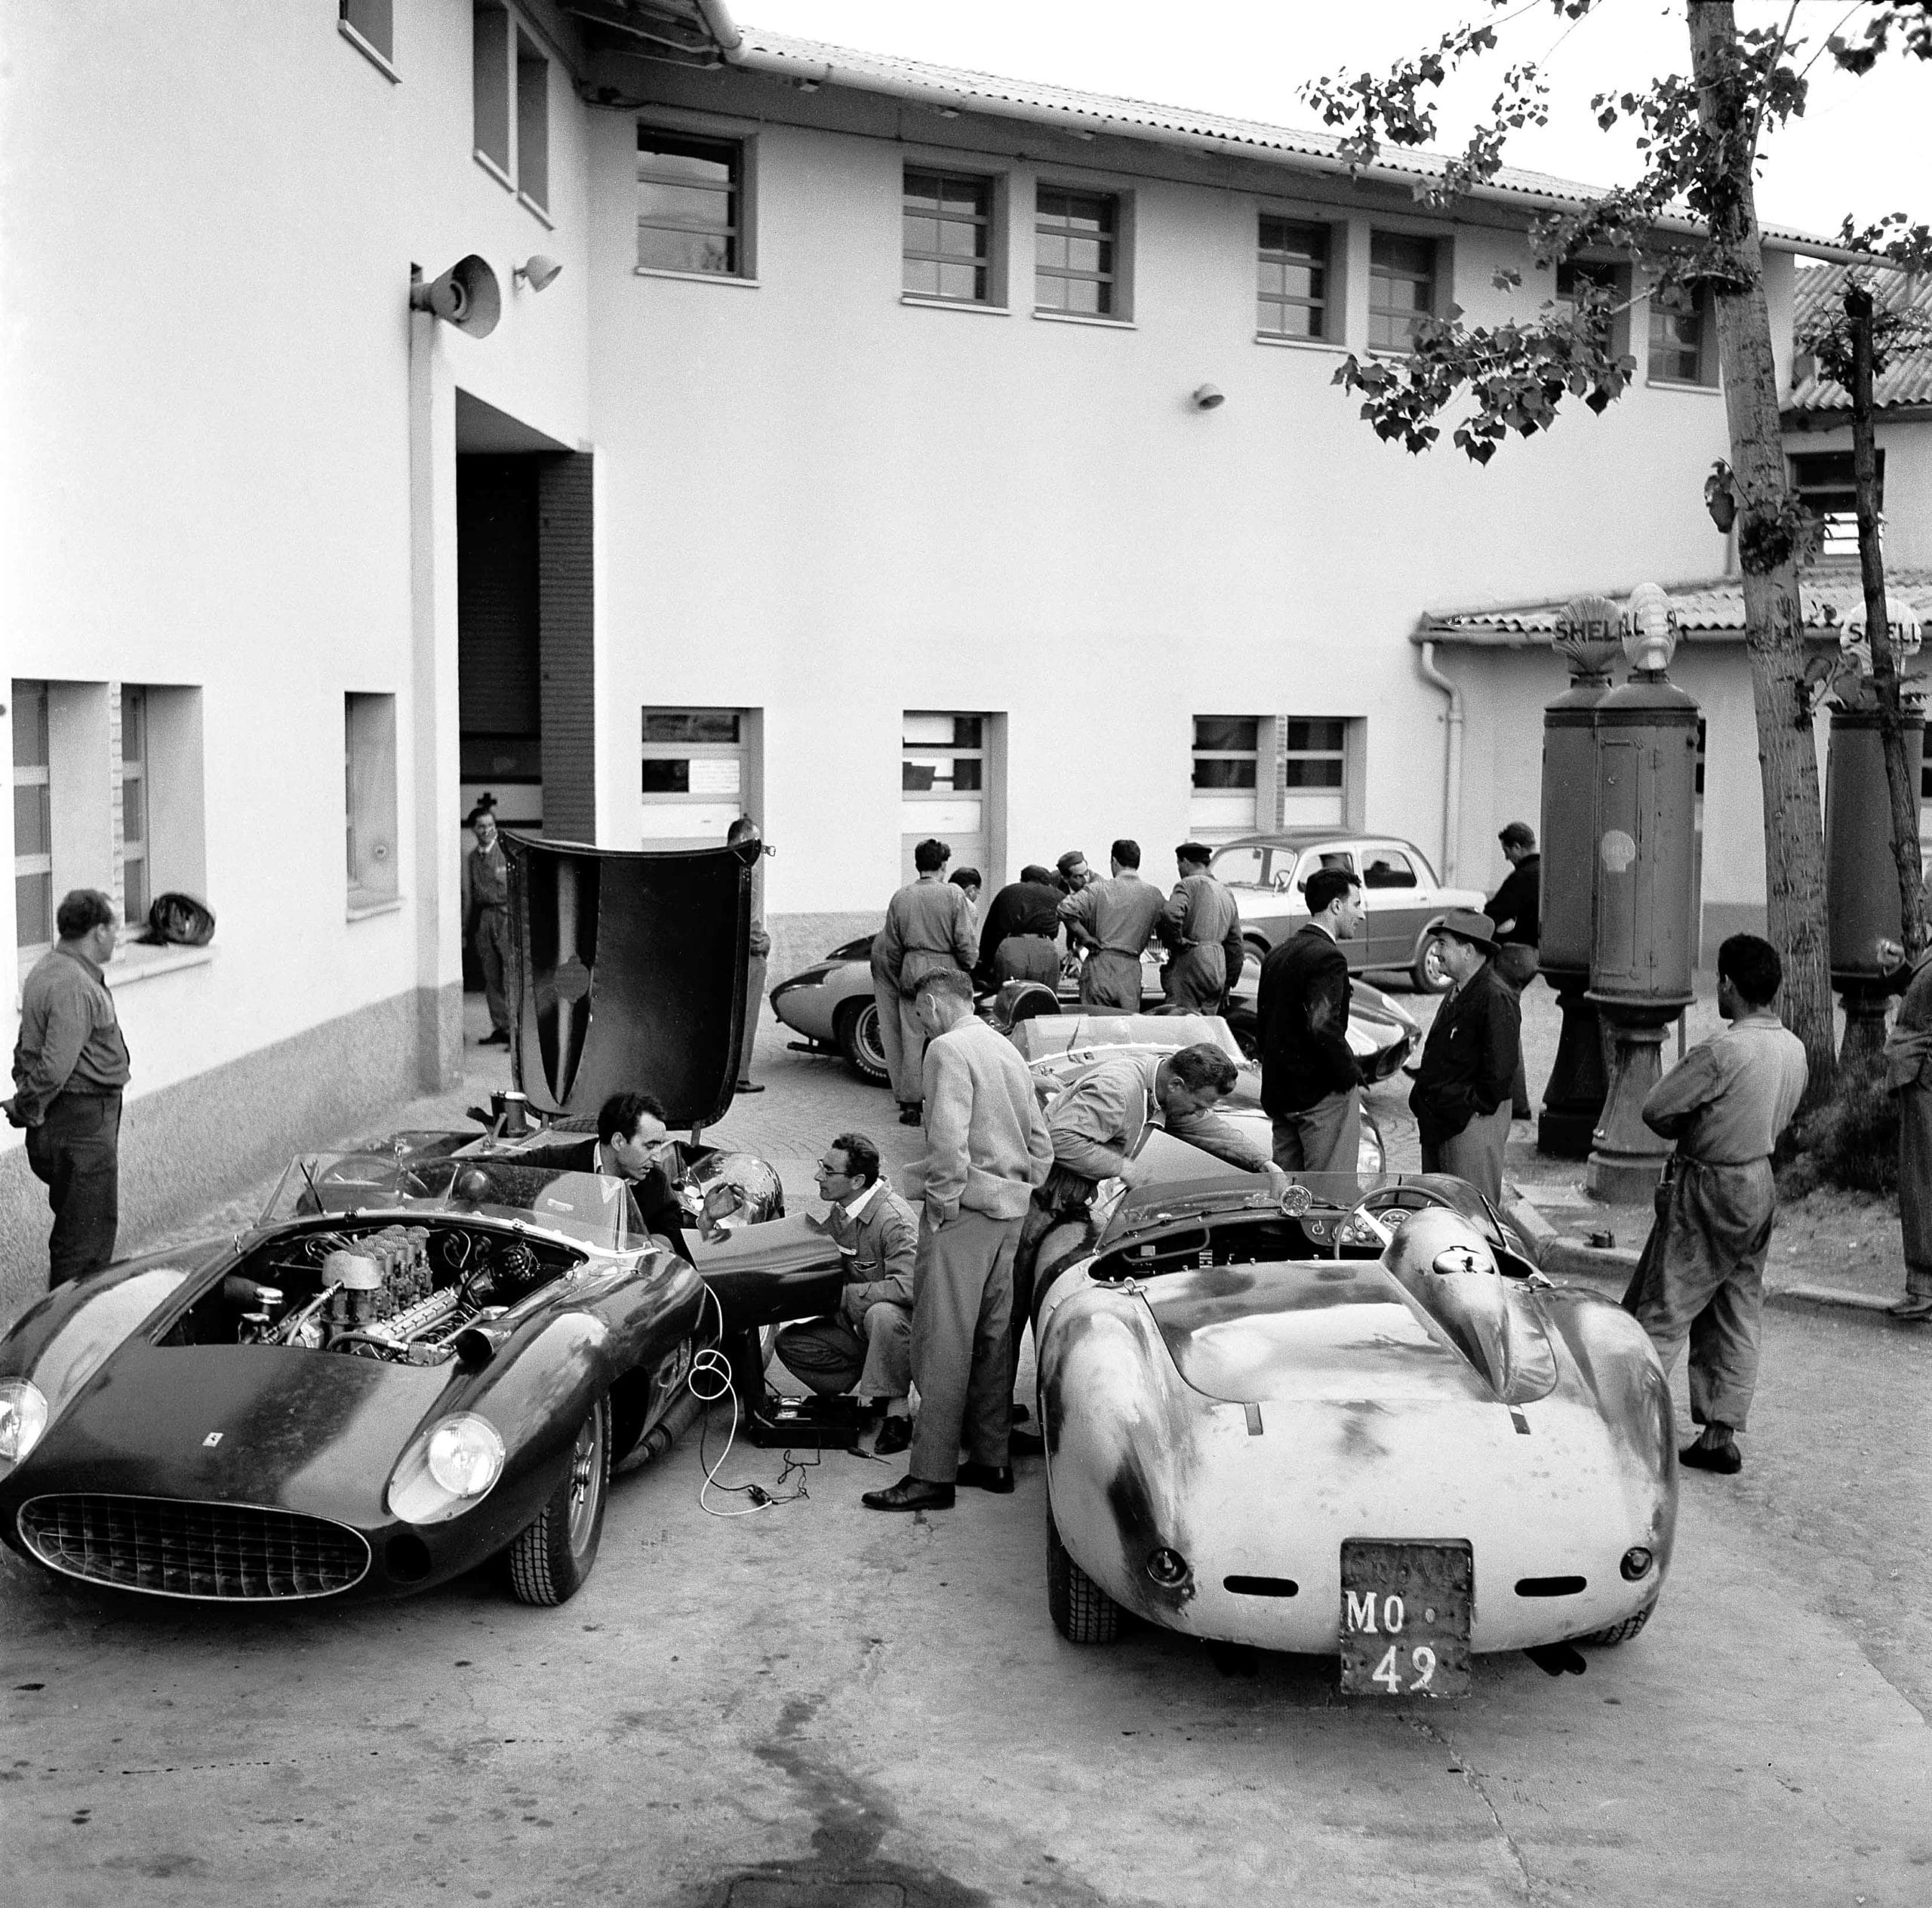 Before The Mille Miglia; Maranello, May 1957. The team cars (the famous type 315 and 335 Sport four-camshaft models to be driven by Taruffi, von Trips, Collins and de Portago) being prepared in the factory courtyard at Maranello with the Collins/Klemantaski car at the left. It is almost like a ballet in rehearsal. (Photo by Klemantaski Collection/Getty Images)